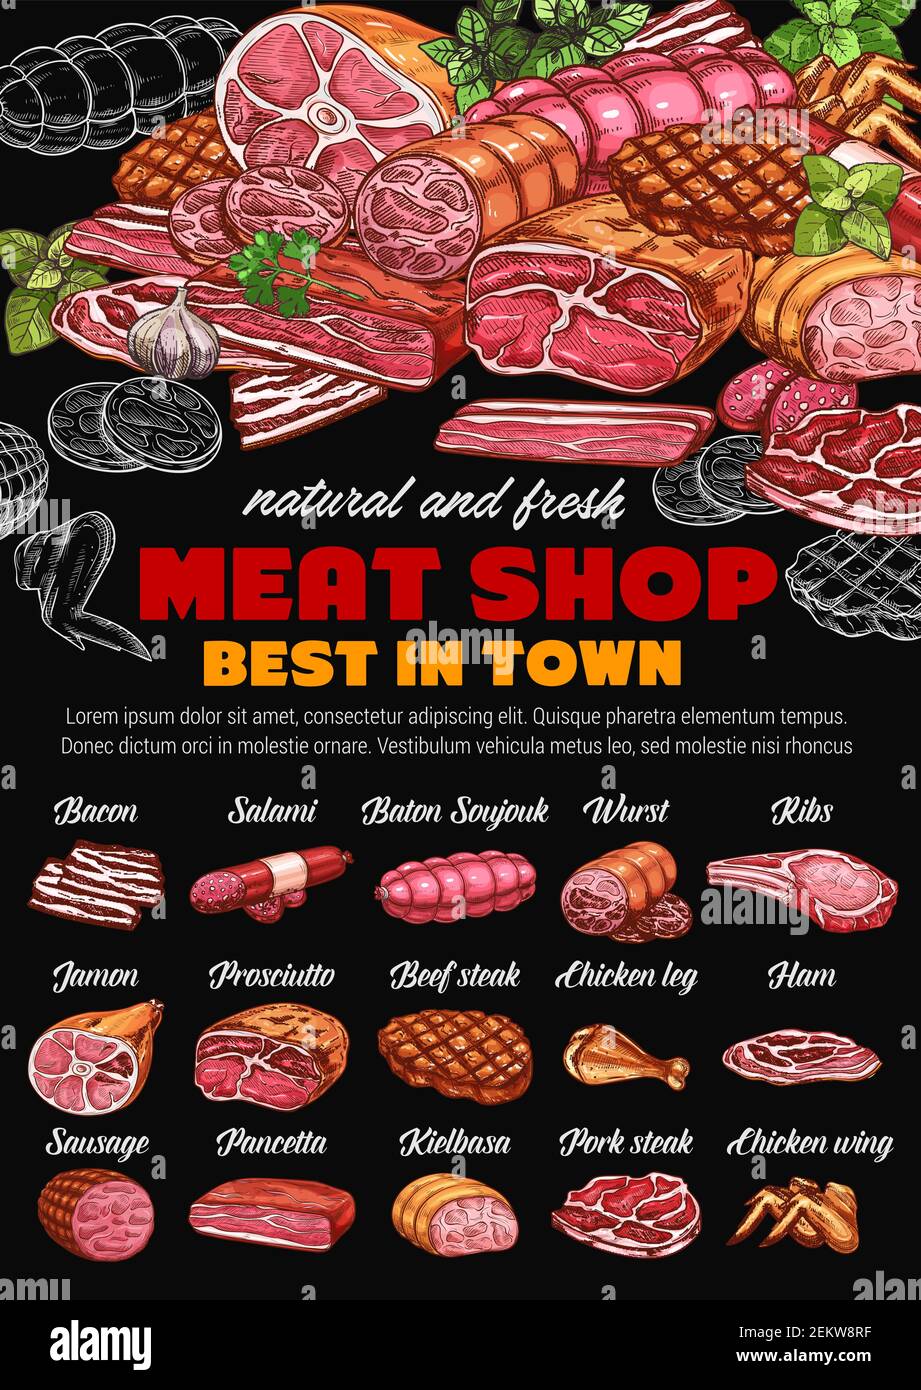 Meat shop, pork and beef sketches on chalkboard. Vector bacon and salami, baton soujouk and prosciutto , jamon and chicken leg. Butchery store sausage Stock Vector